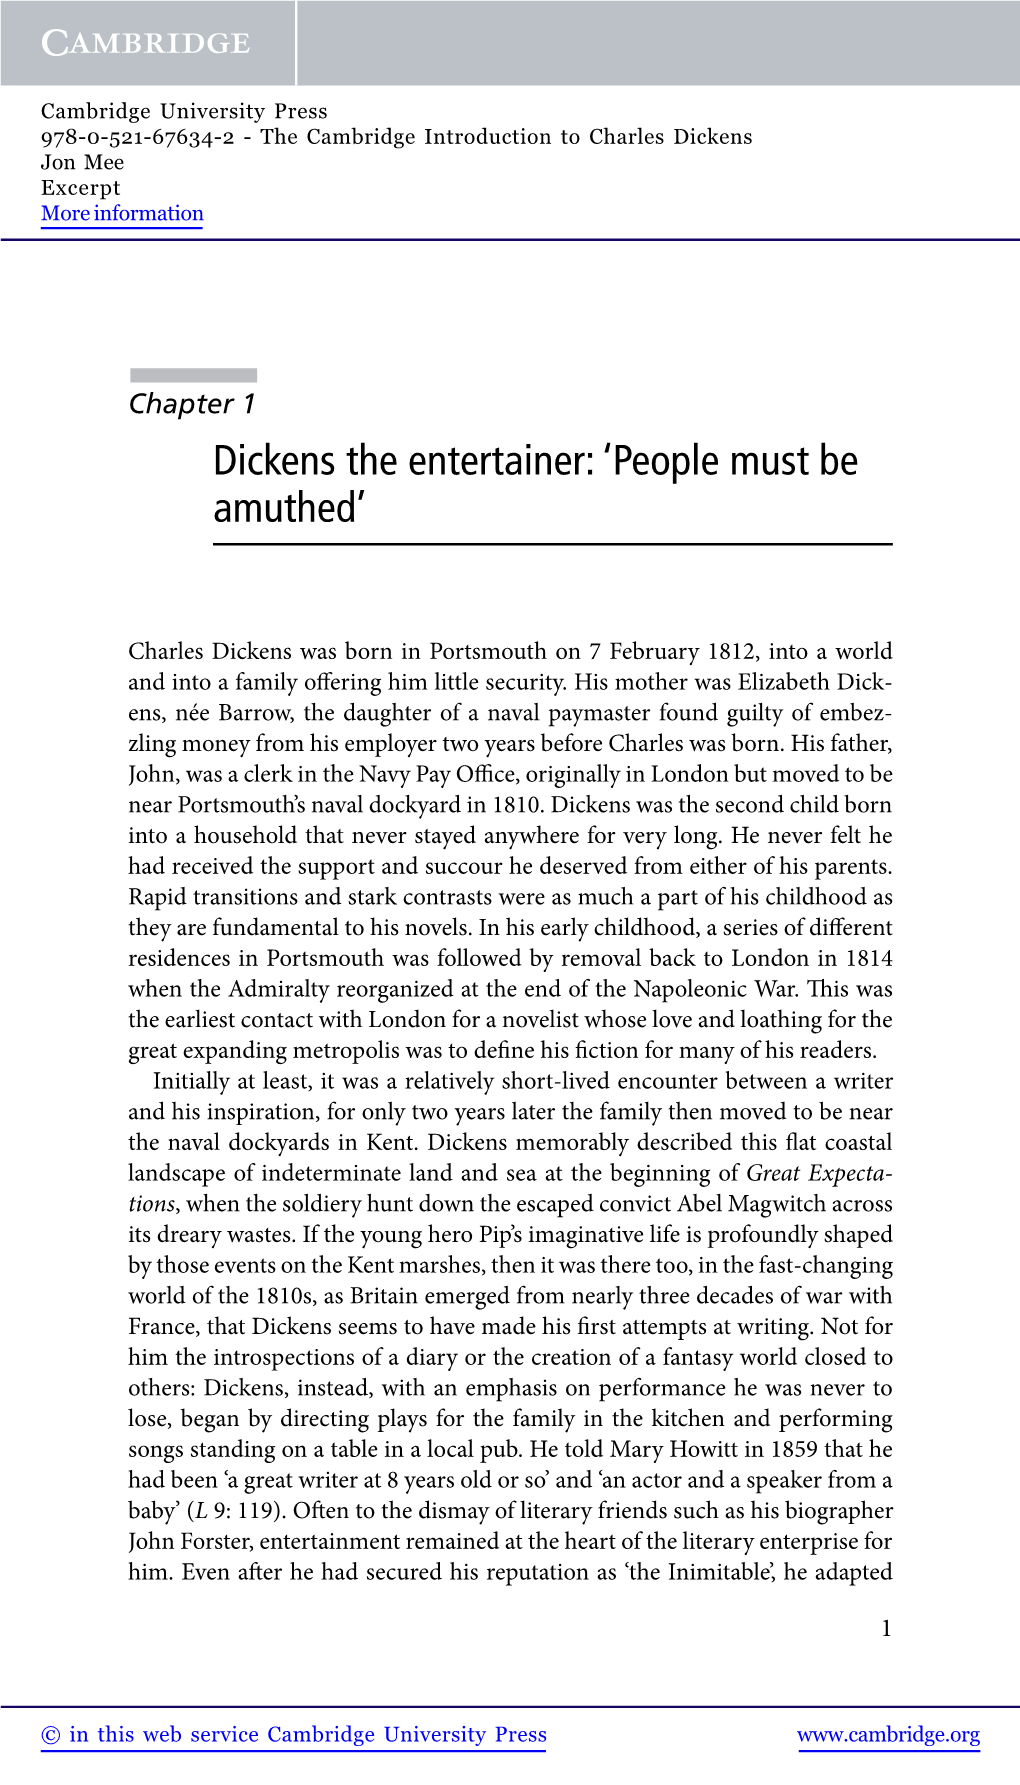 Dickens the Entertainer: ‘People Must Be Amuthed’